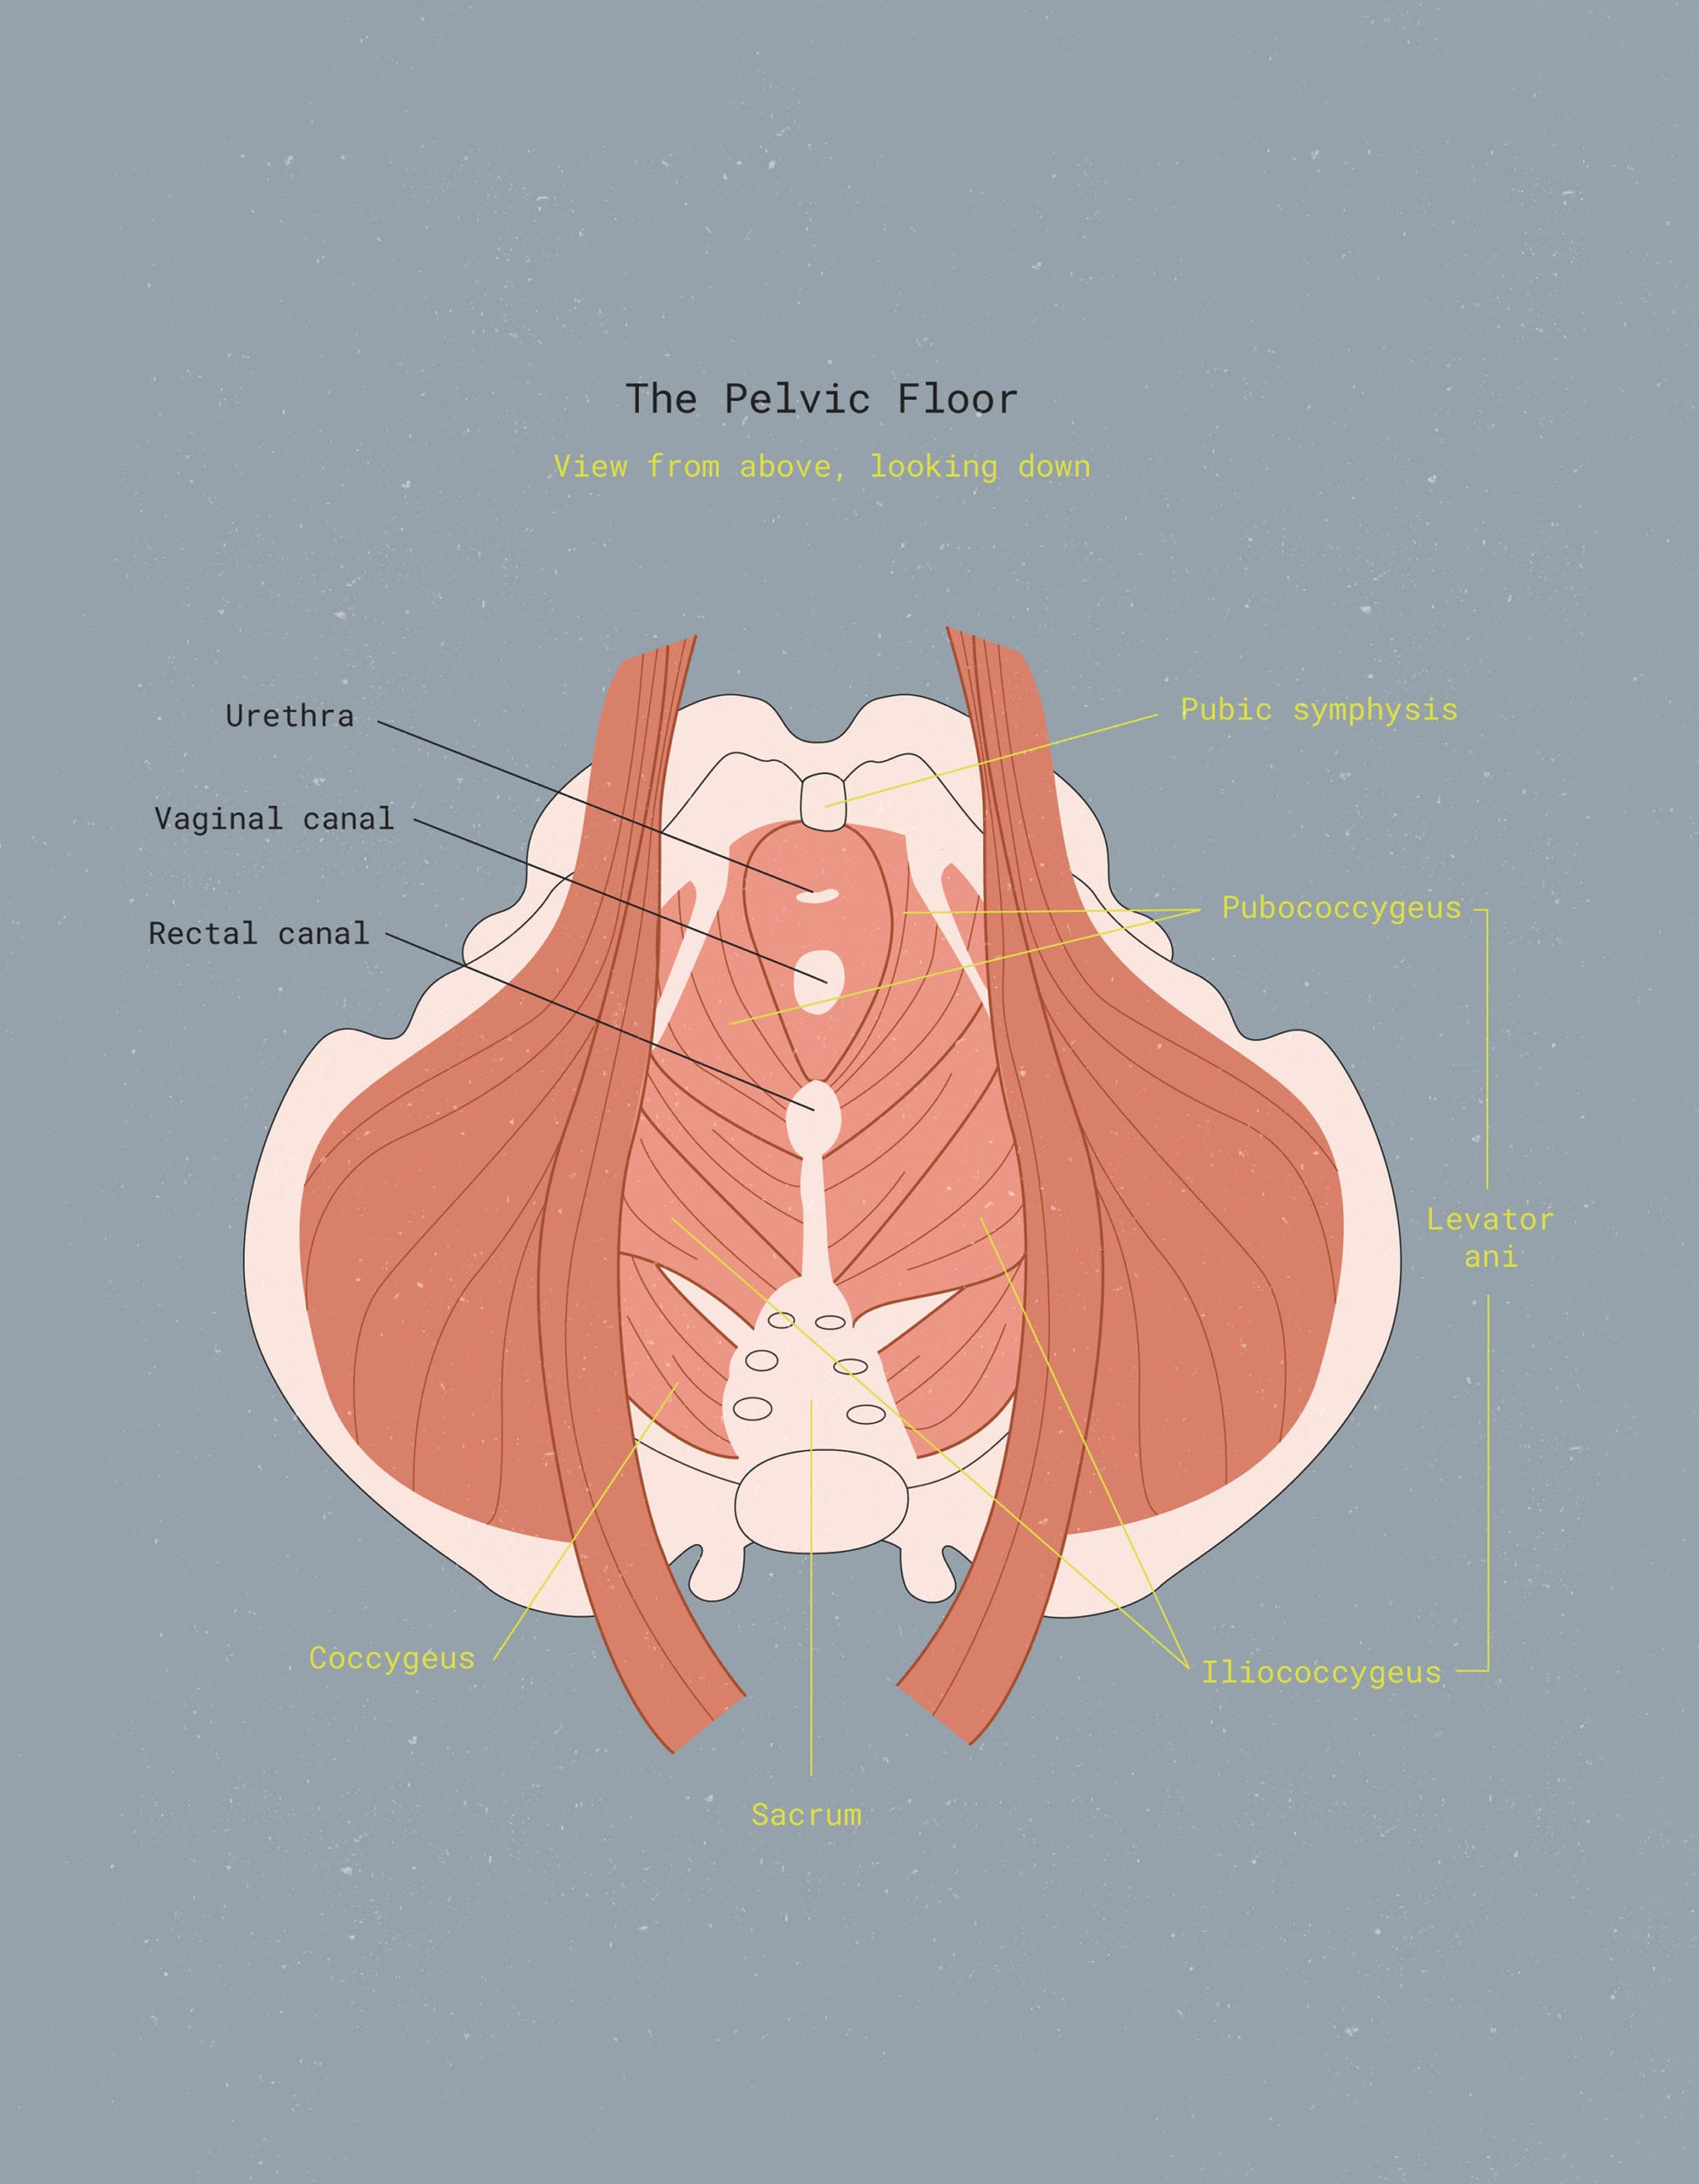 Up close & personal with: Your pelvic floor